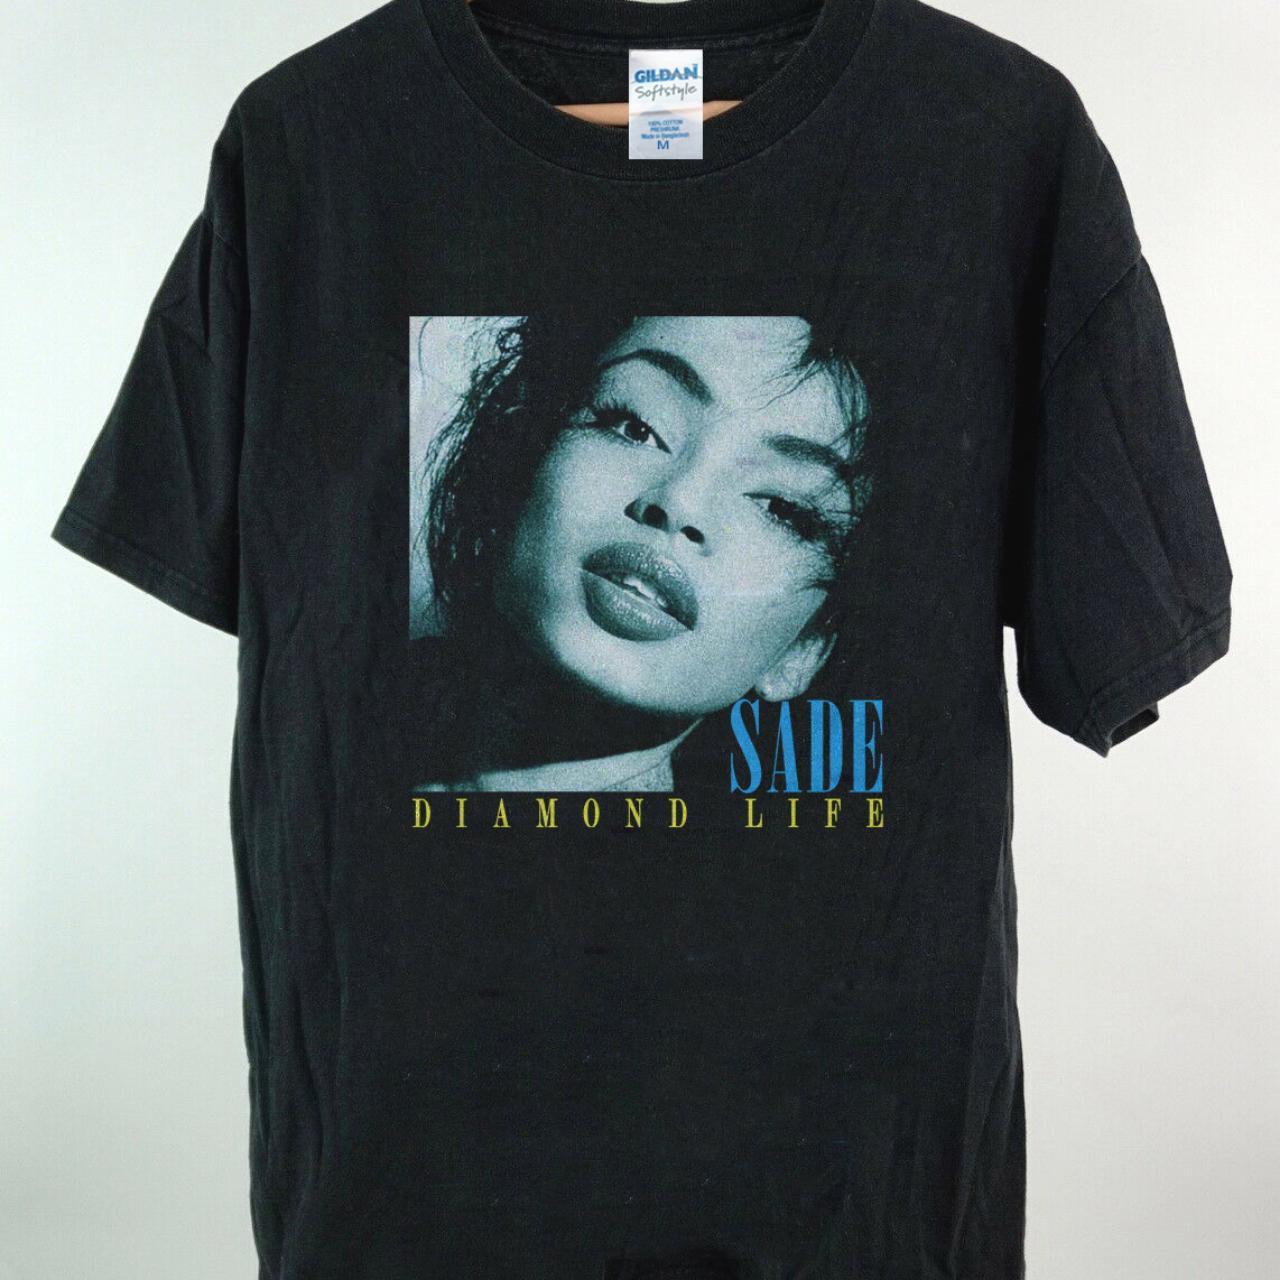 Sade Bandtee T-Shirt Size Available, Product Details...